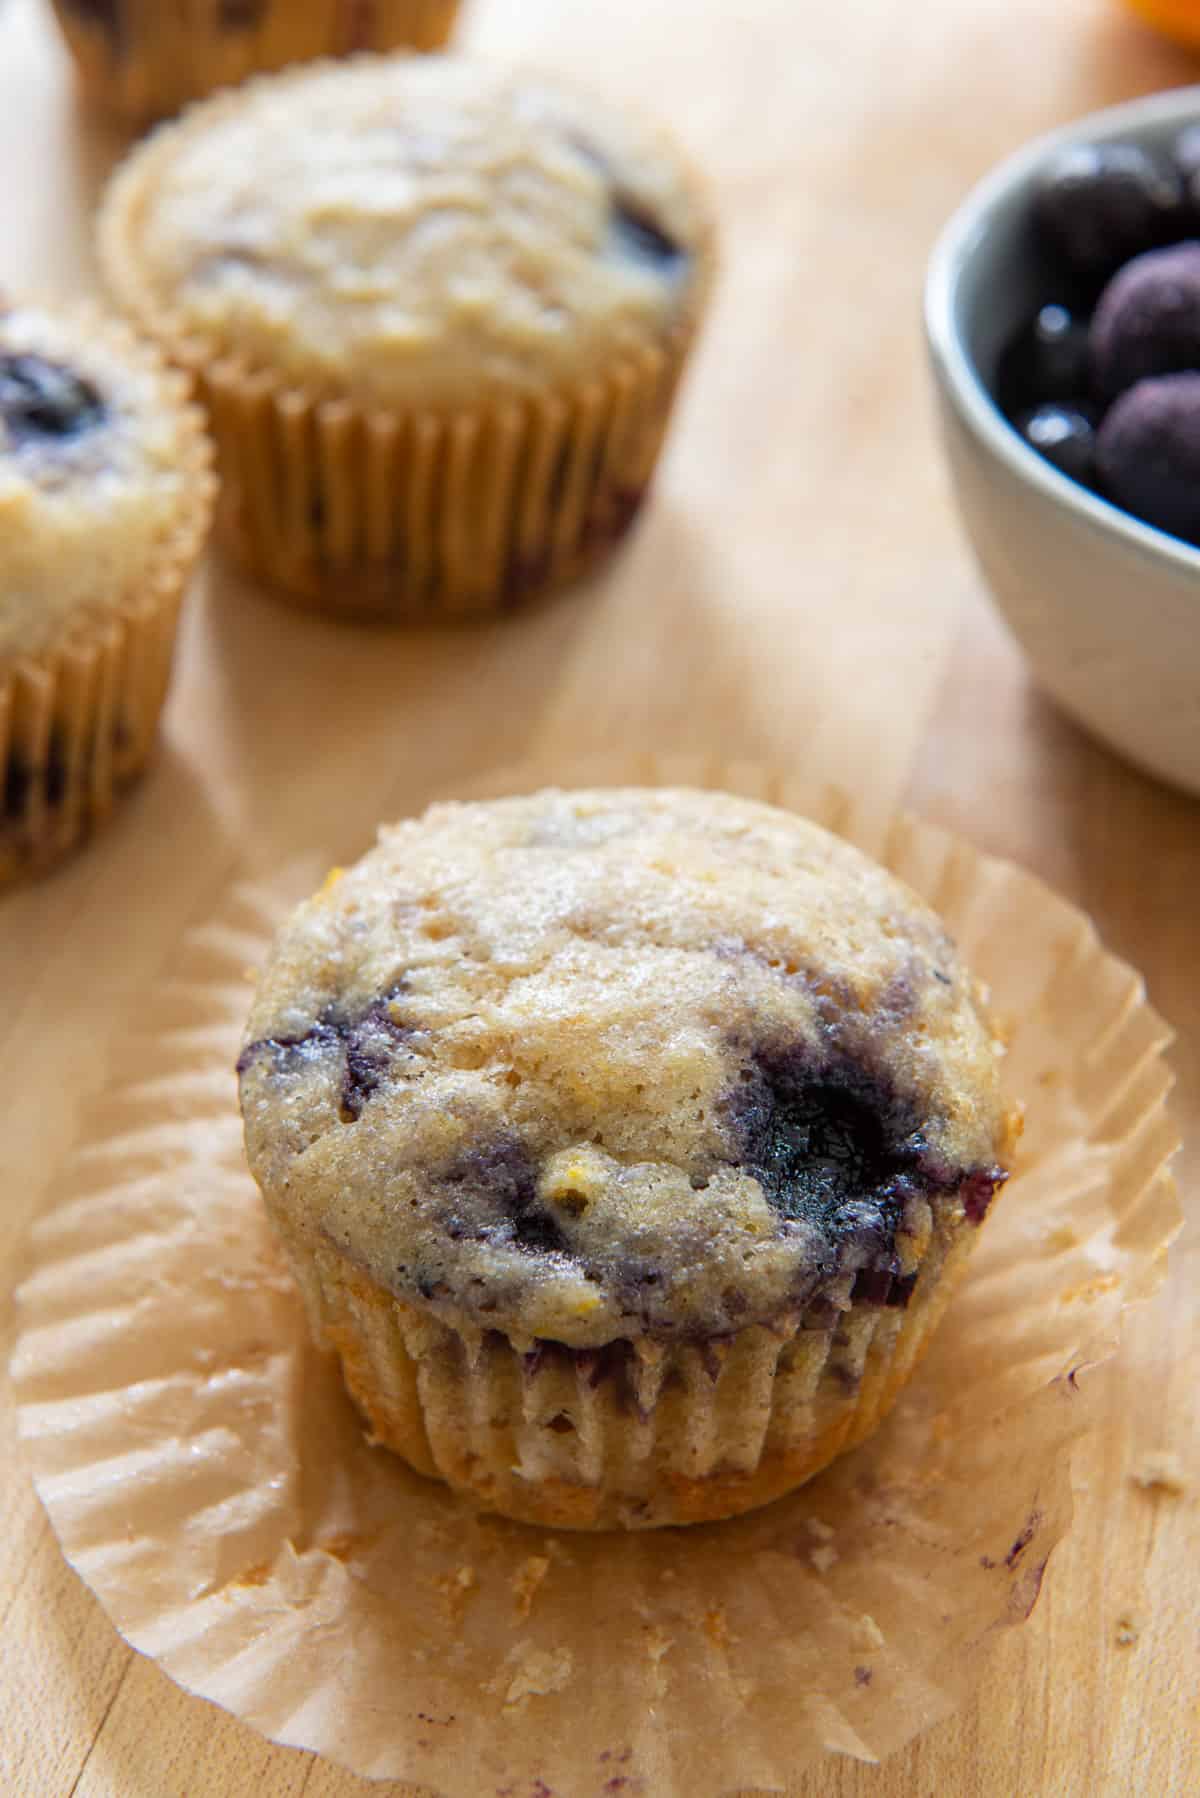 Sourdough Blueberry Muffins Unwrapped On a Wooden Board